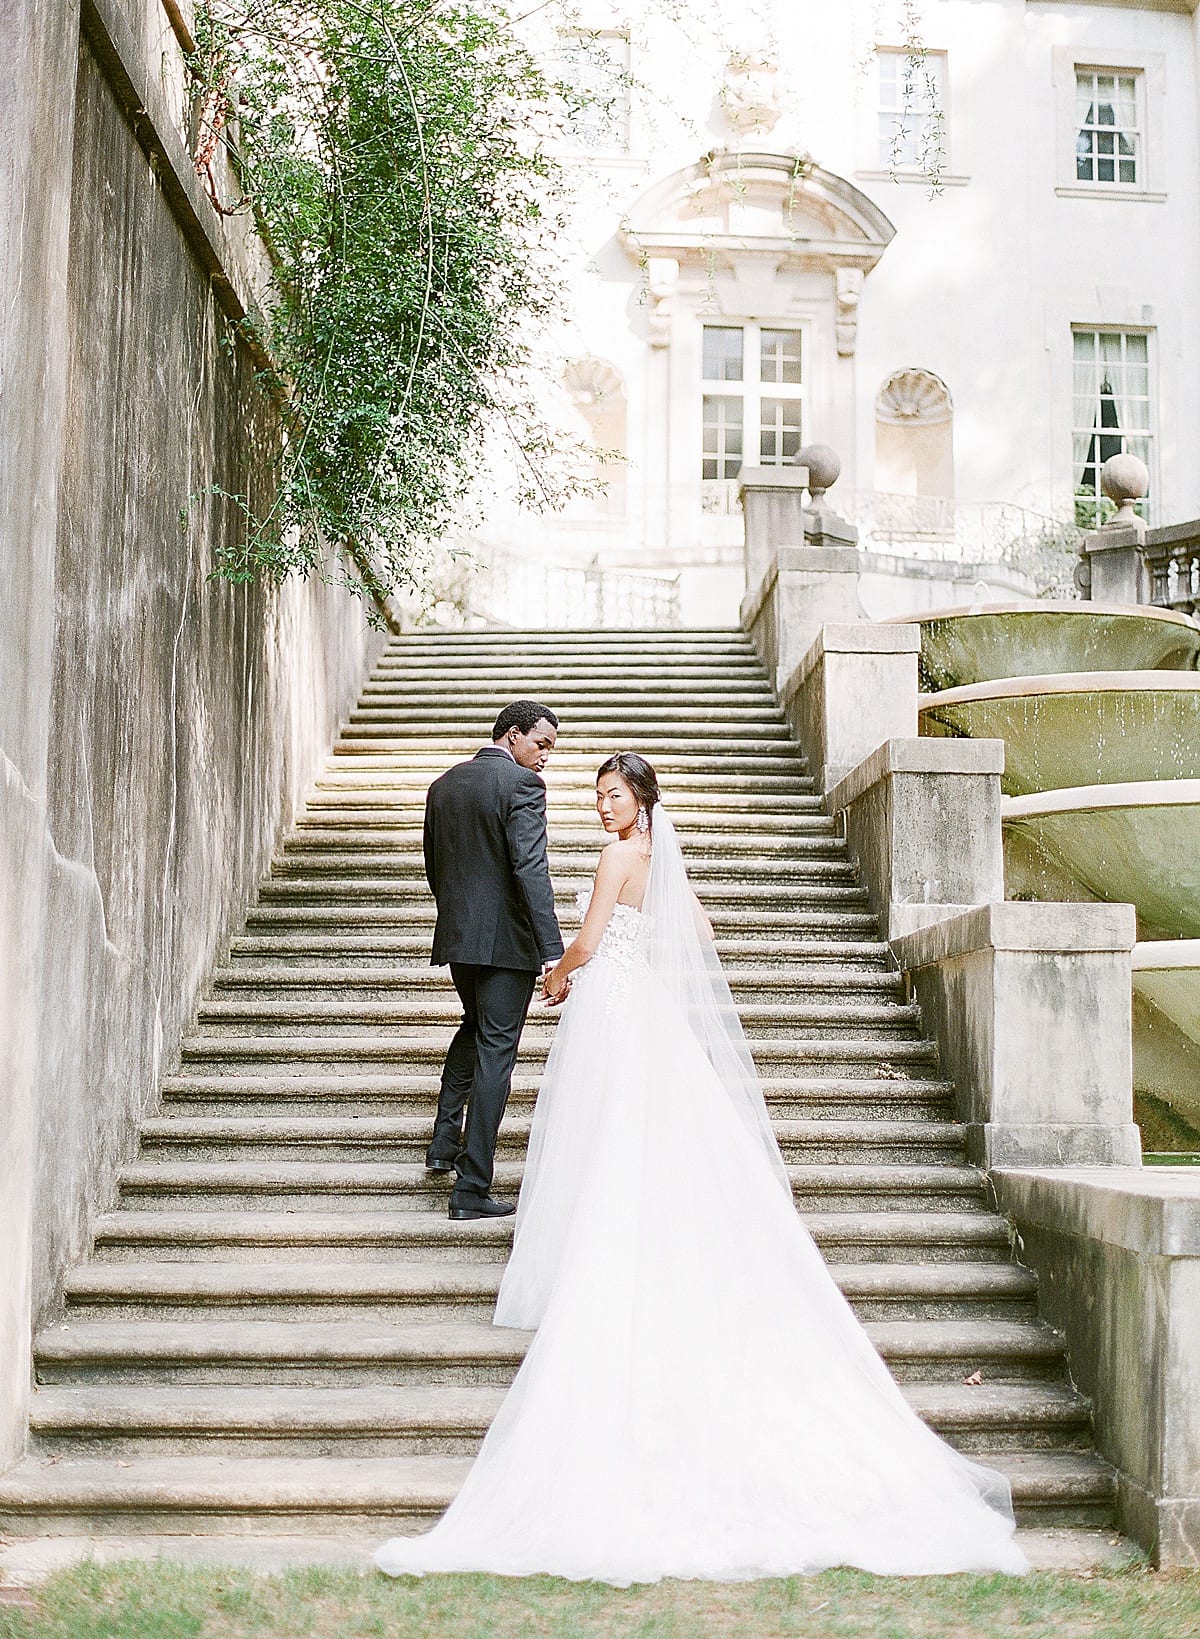 The Swan House Wedding Venue Bride and Groom on Stairs Photo 